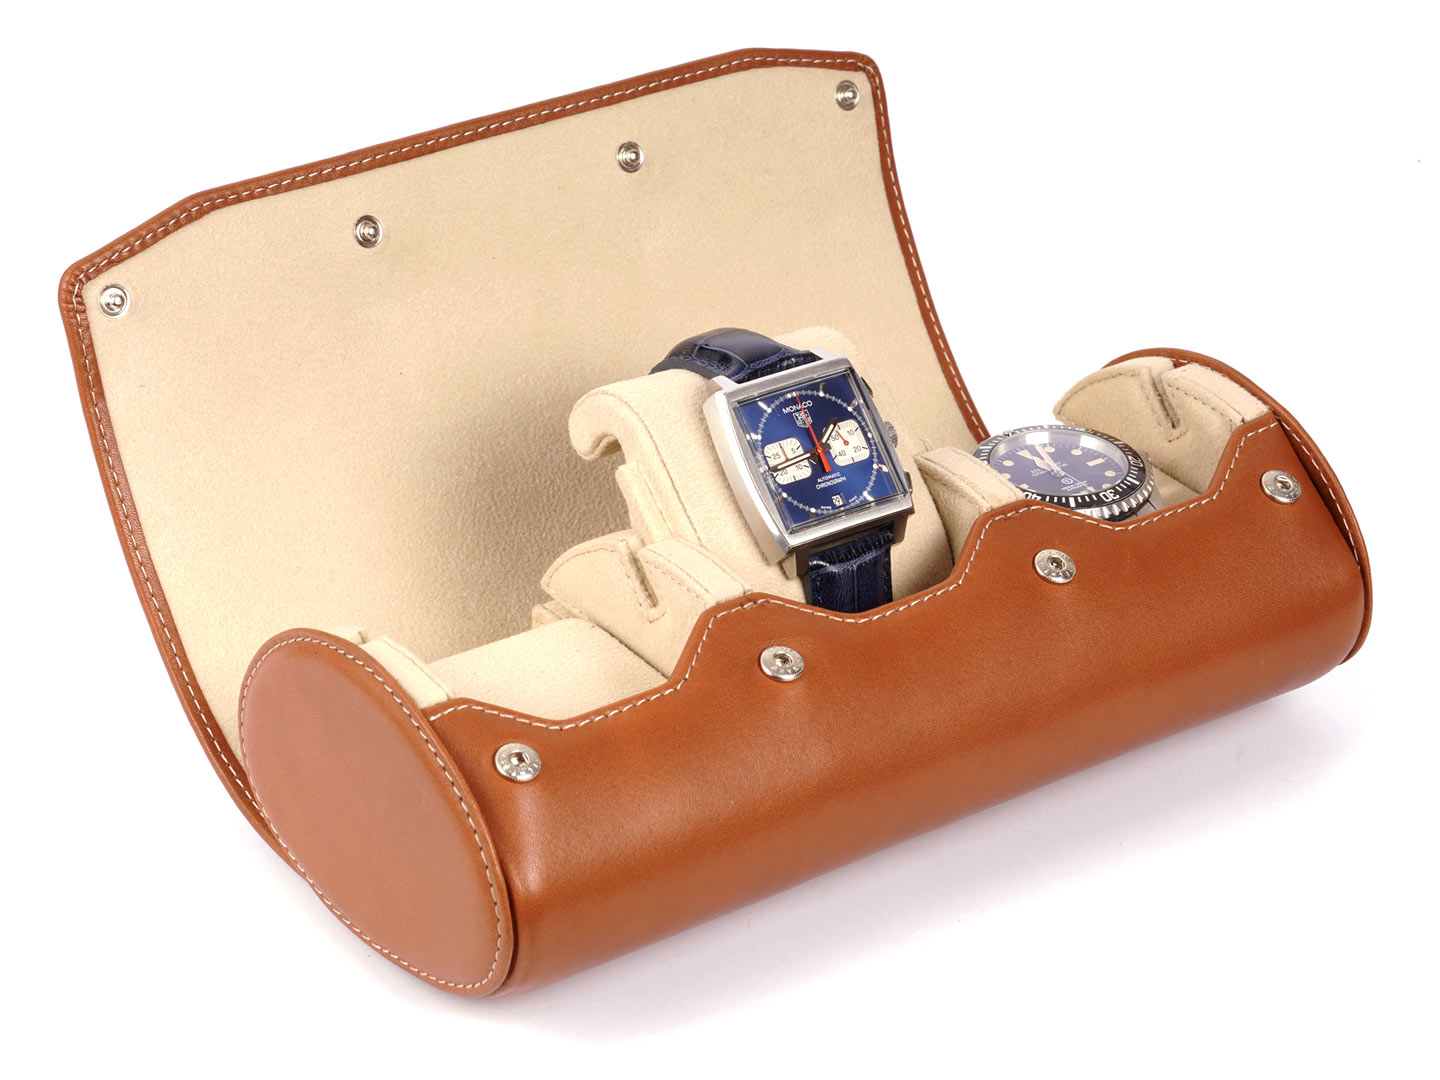 3-watches-case-cognac-leather-open-display-Carapaz